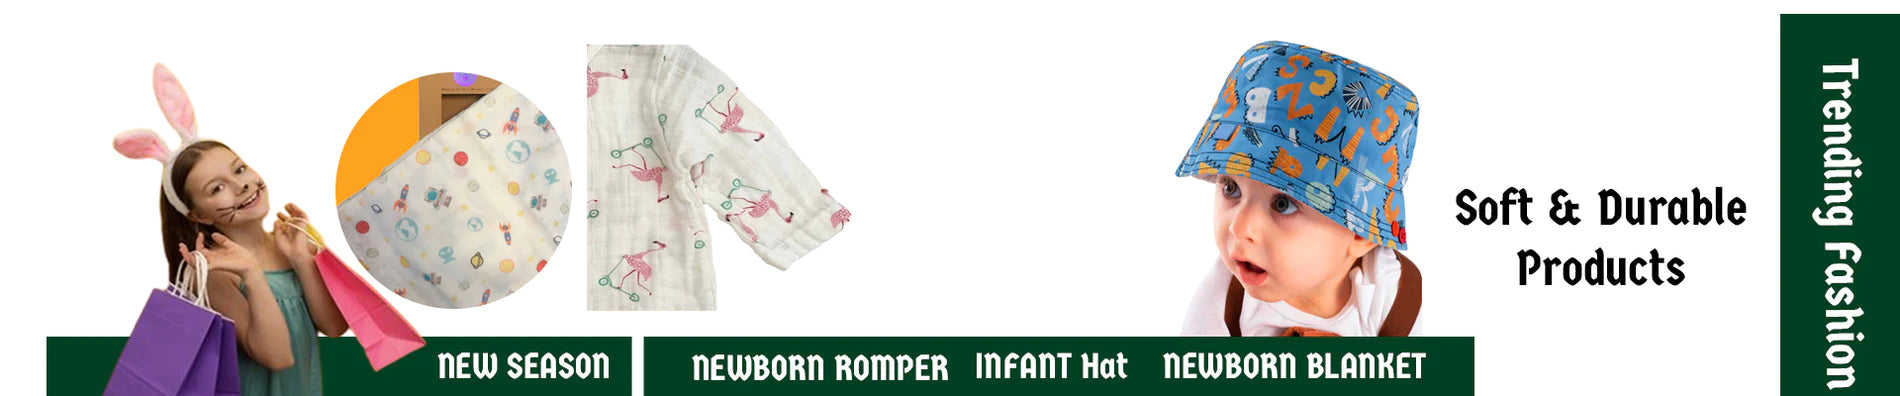 What Are Baby Muslin Cloths Used For?